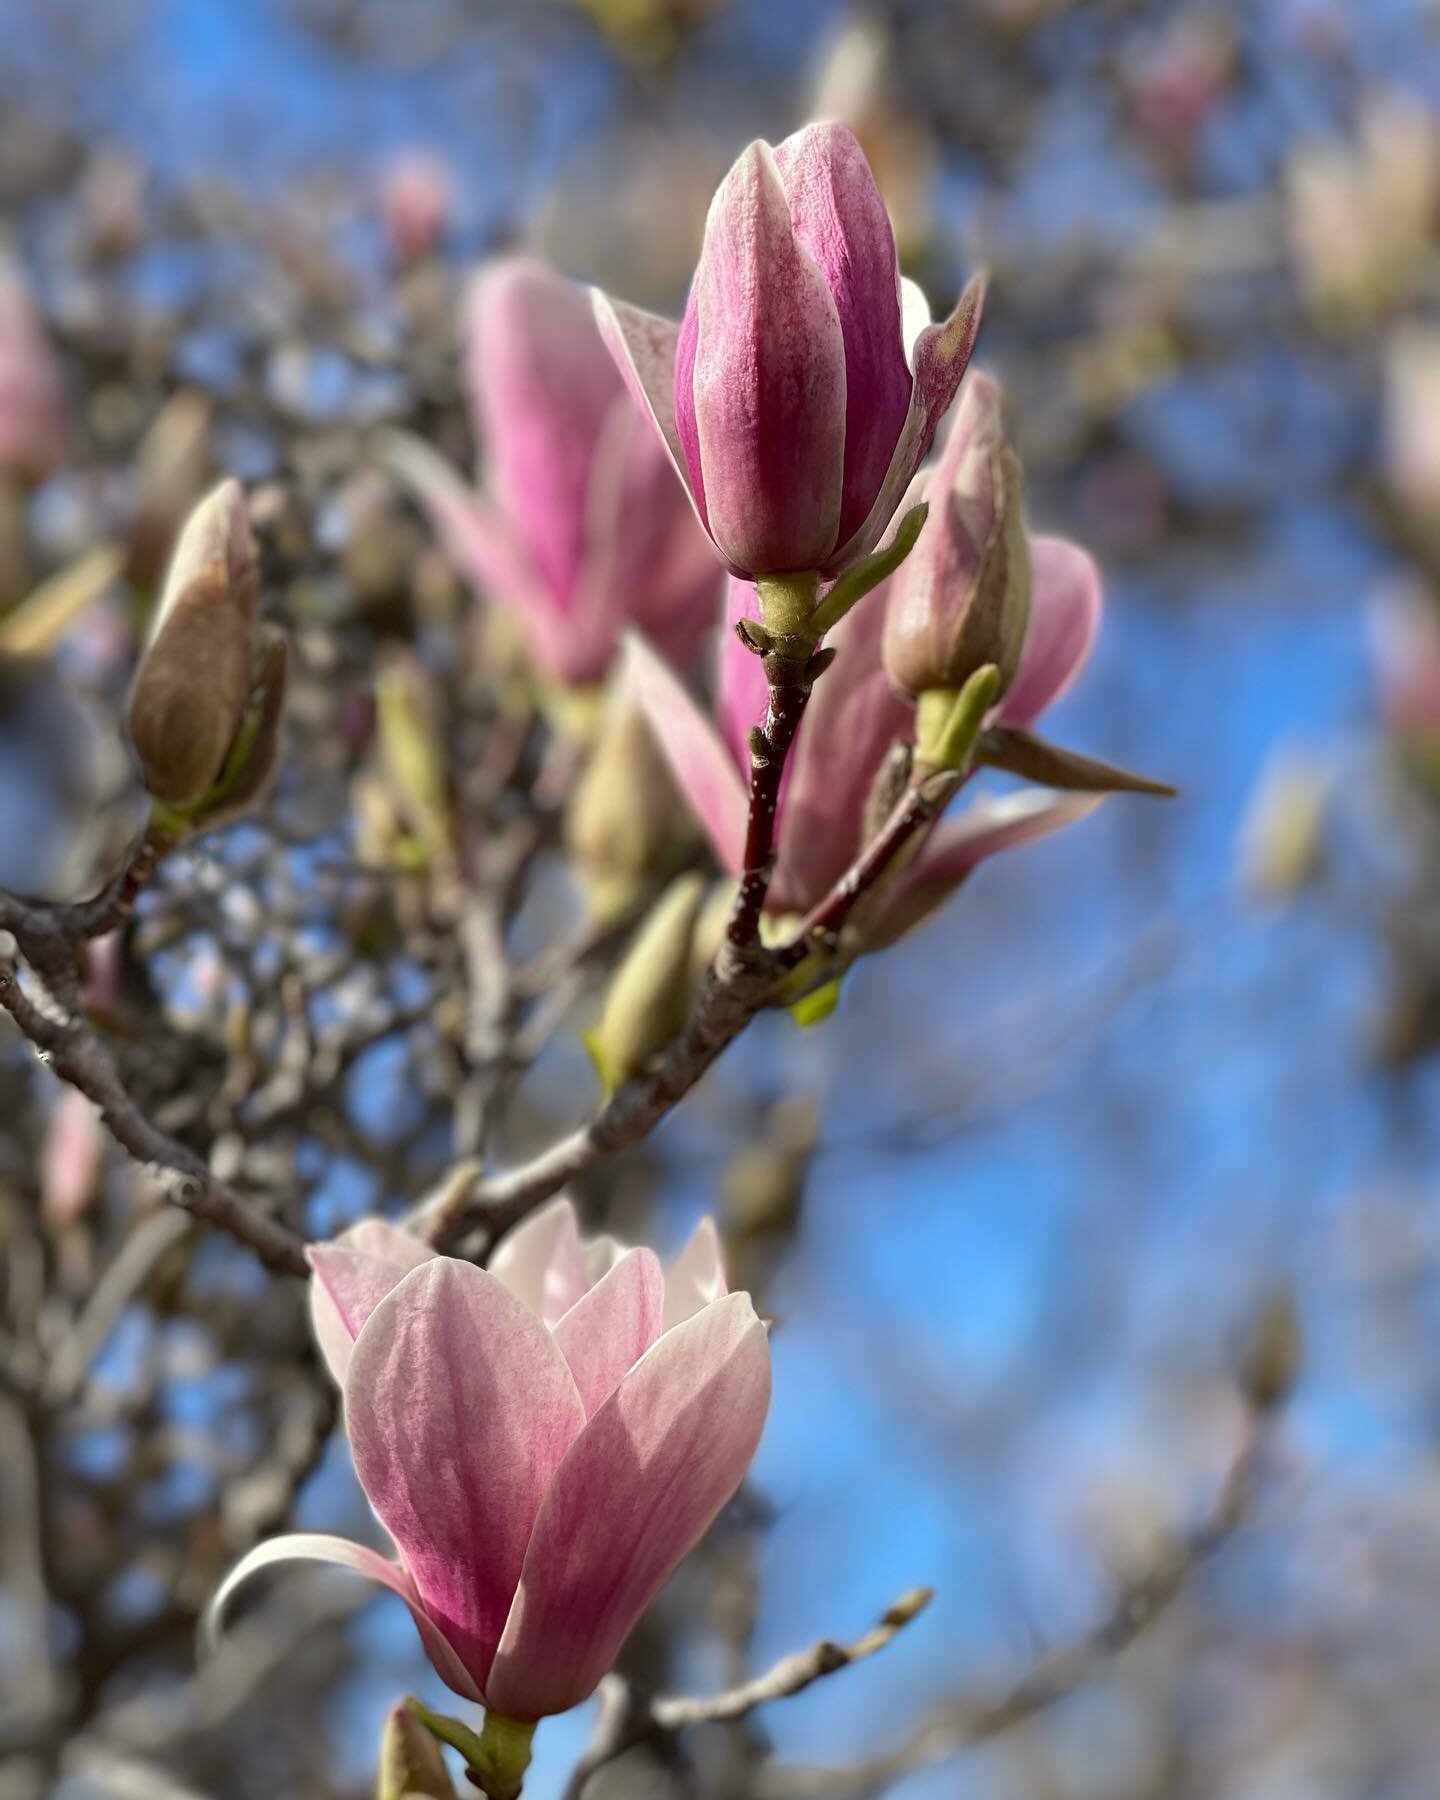 The tulip tree is blooming, the redbud has blooms, and the peony is starting to come up again. #signsofspring #okwx #backyard